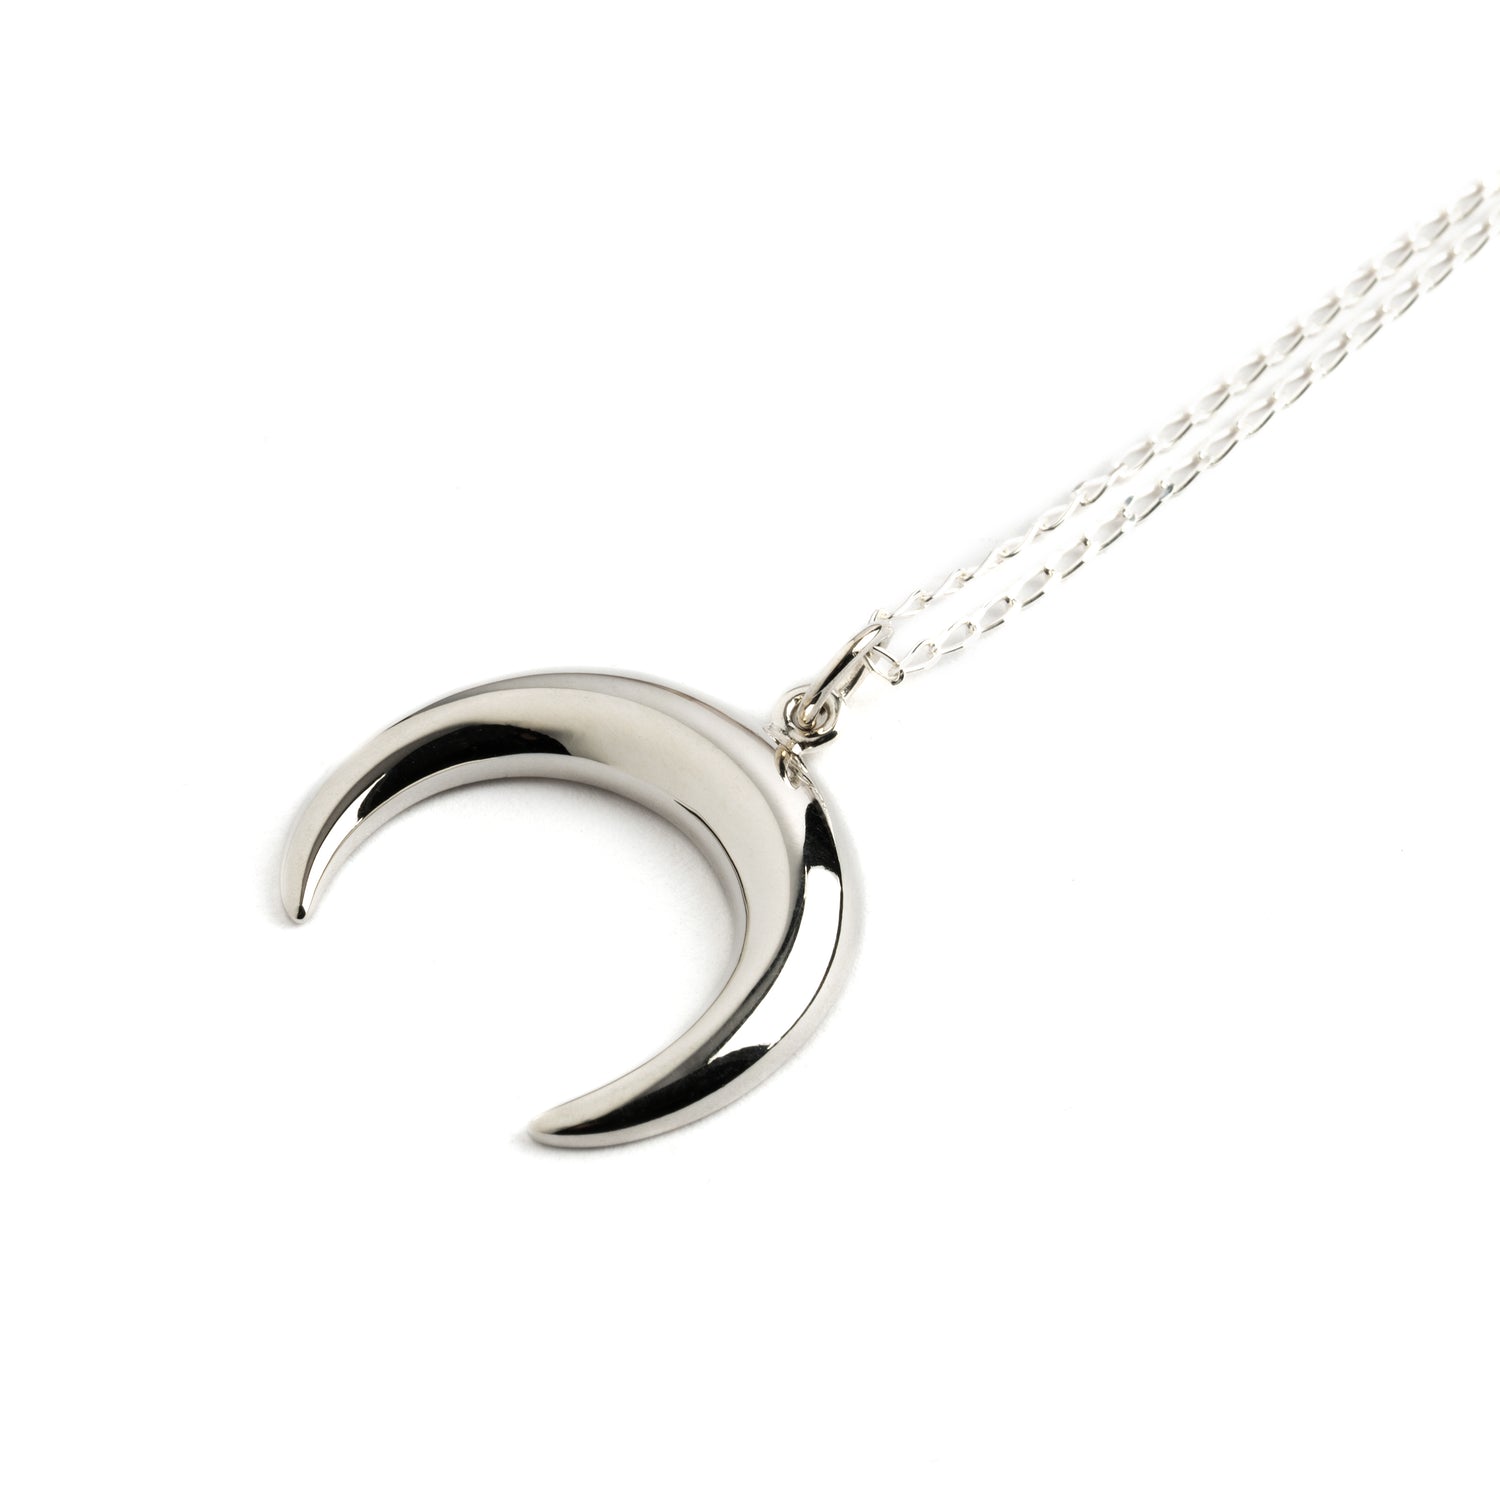 Silver crescent moon charm on a chain necklace right side view